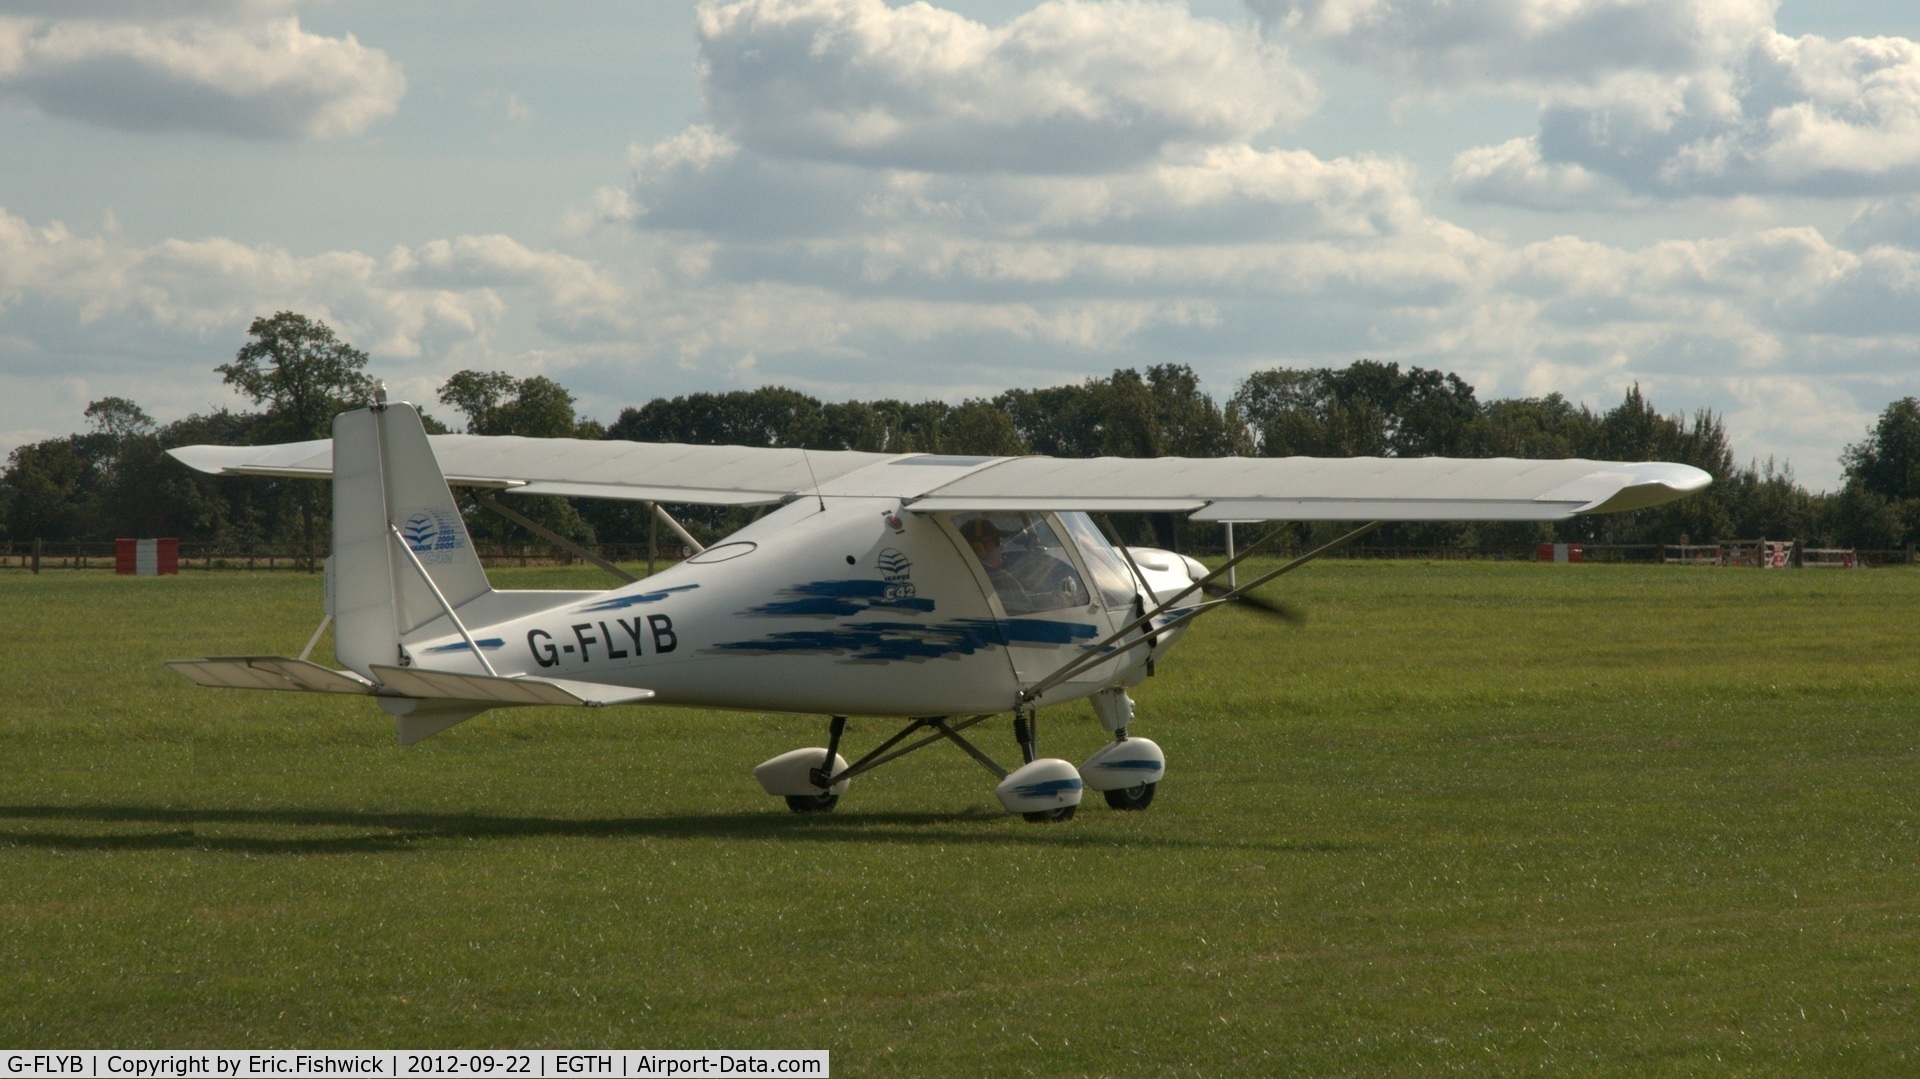 G-FLYB, 2003 Comco Ikarus C42 FB100 C/N 0309-6572, 2. G-FLYB at Shuttleworth Uncovered - Air Show, Sept. 2012.